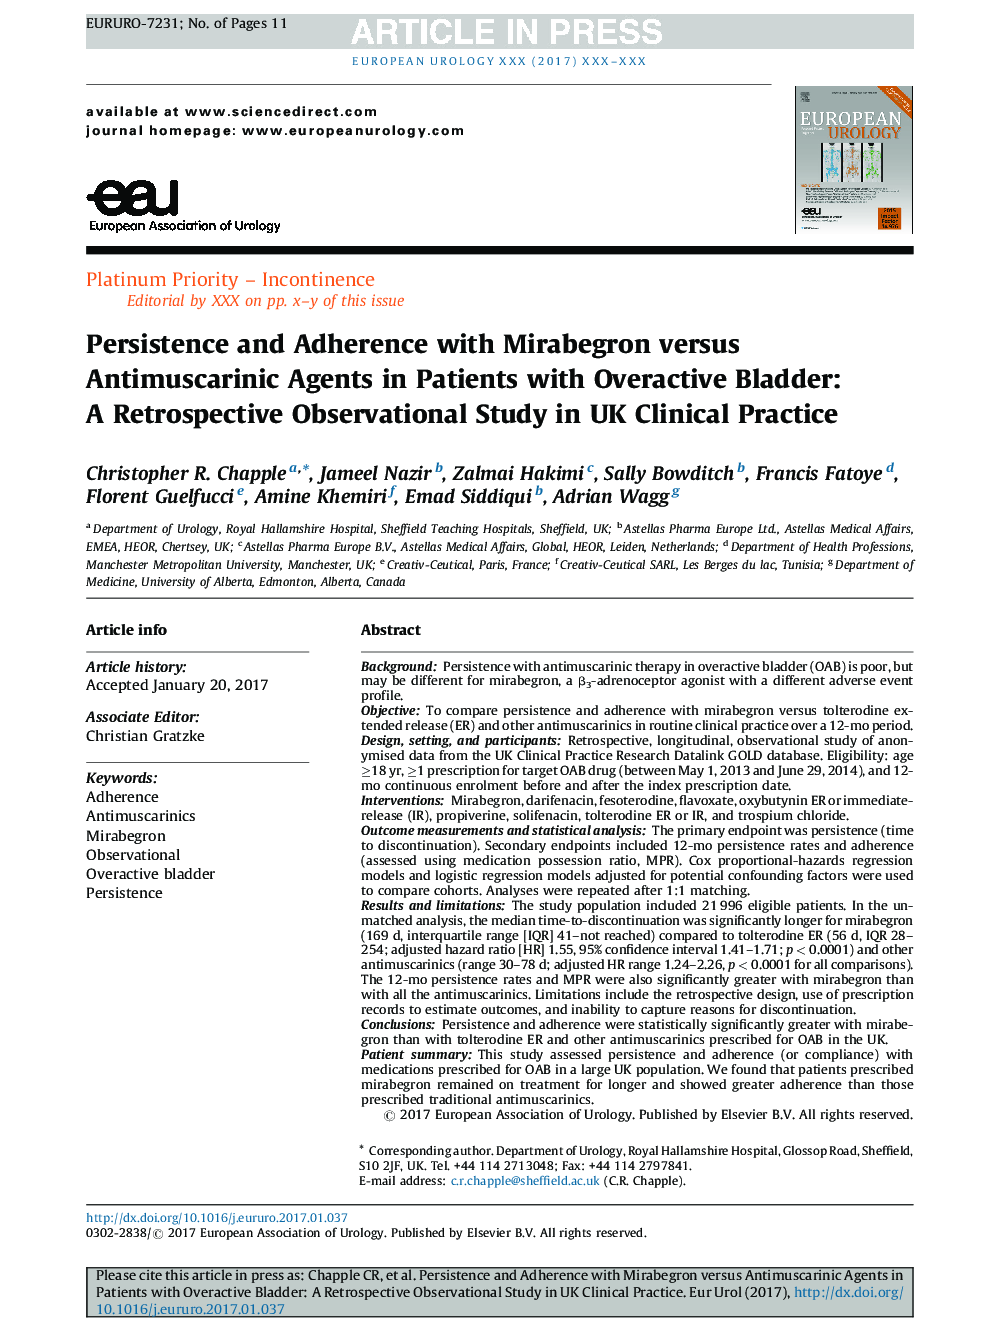 Persistence and Adherence with Mirabegron versus Antimuscarinic Agents in Patients with Overactive Bladder: A Retrospective Observational Study in UK Clinical Practice